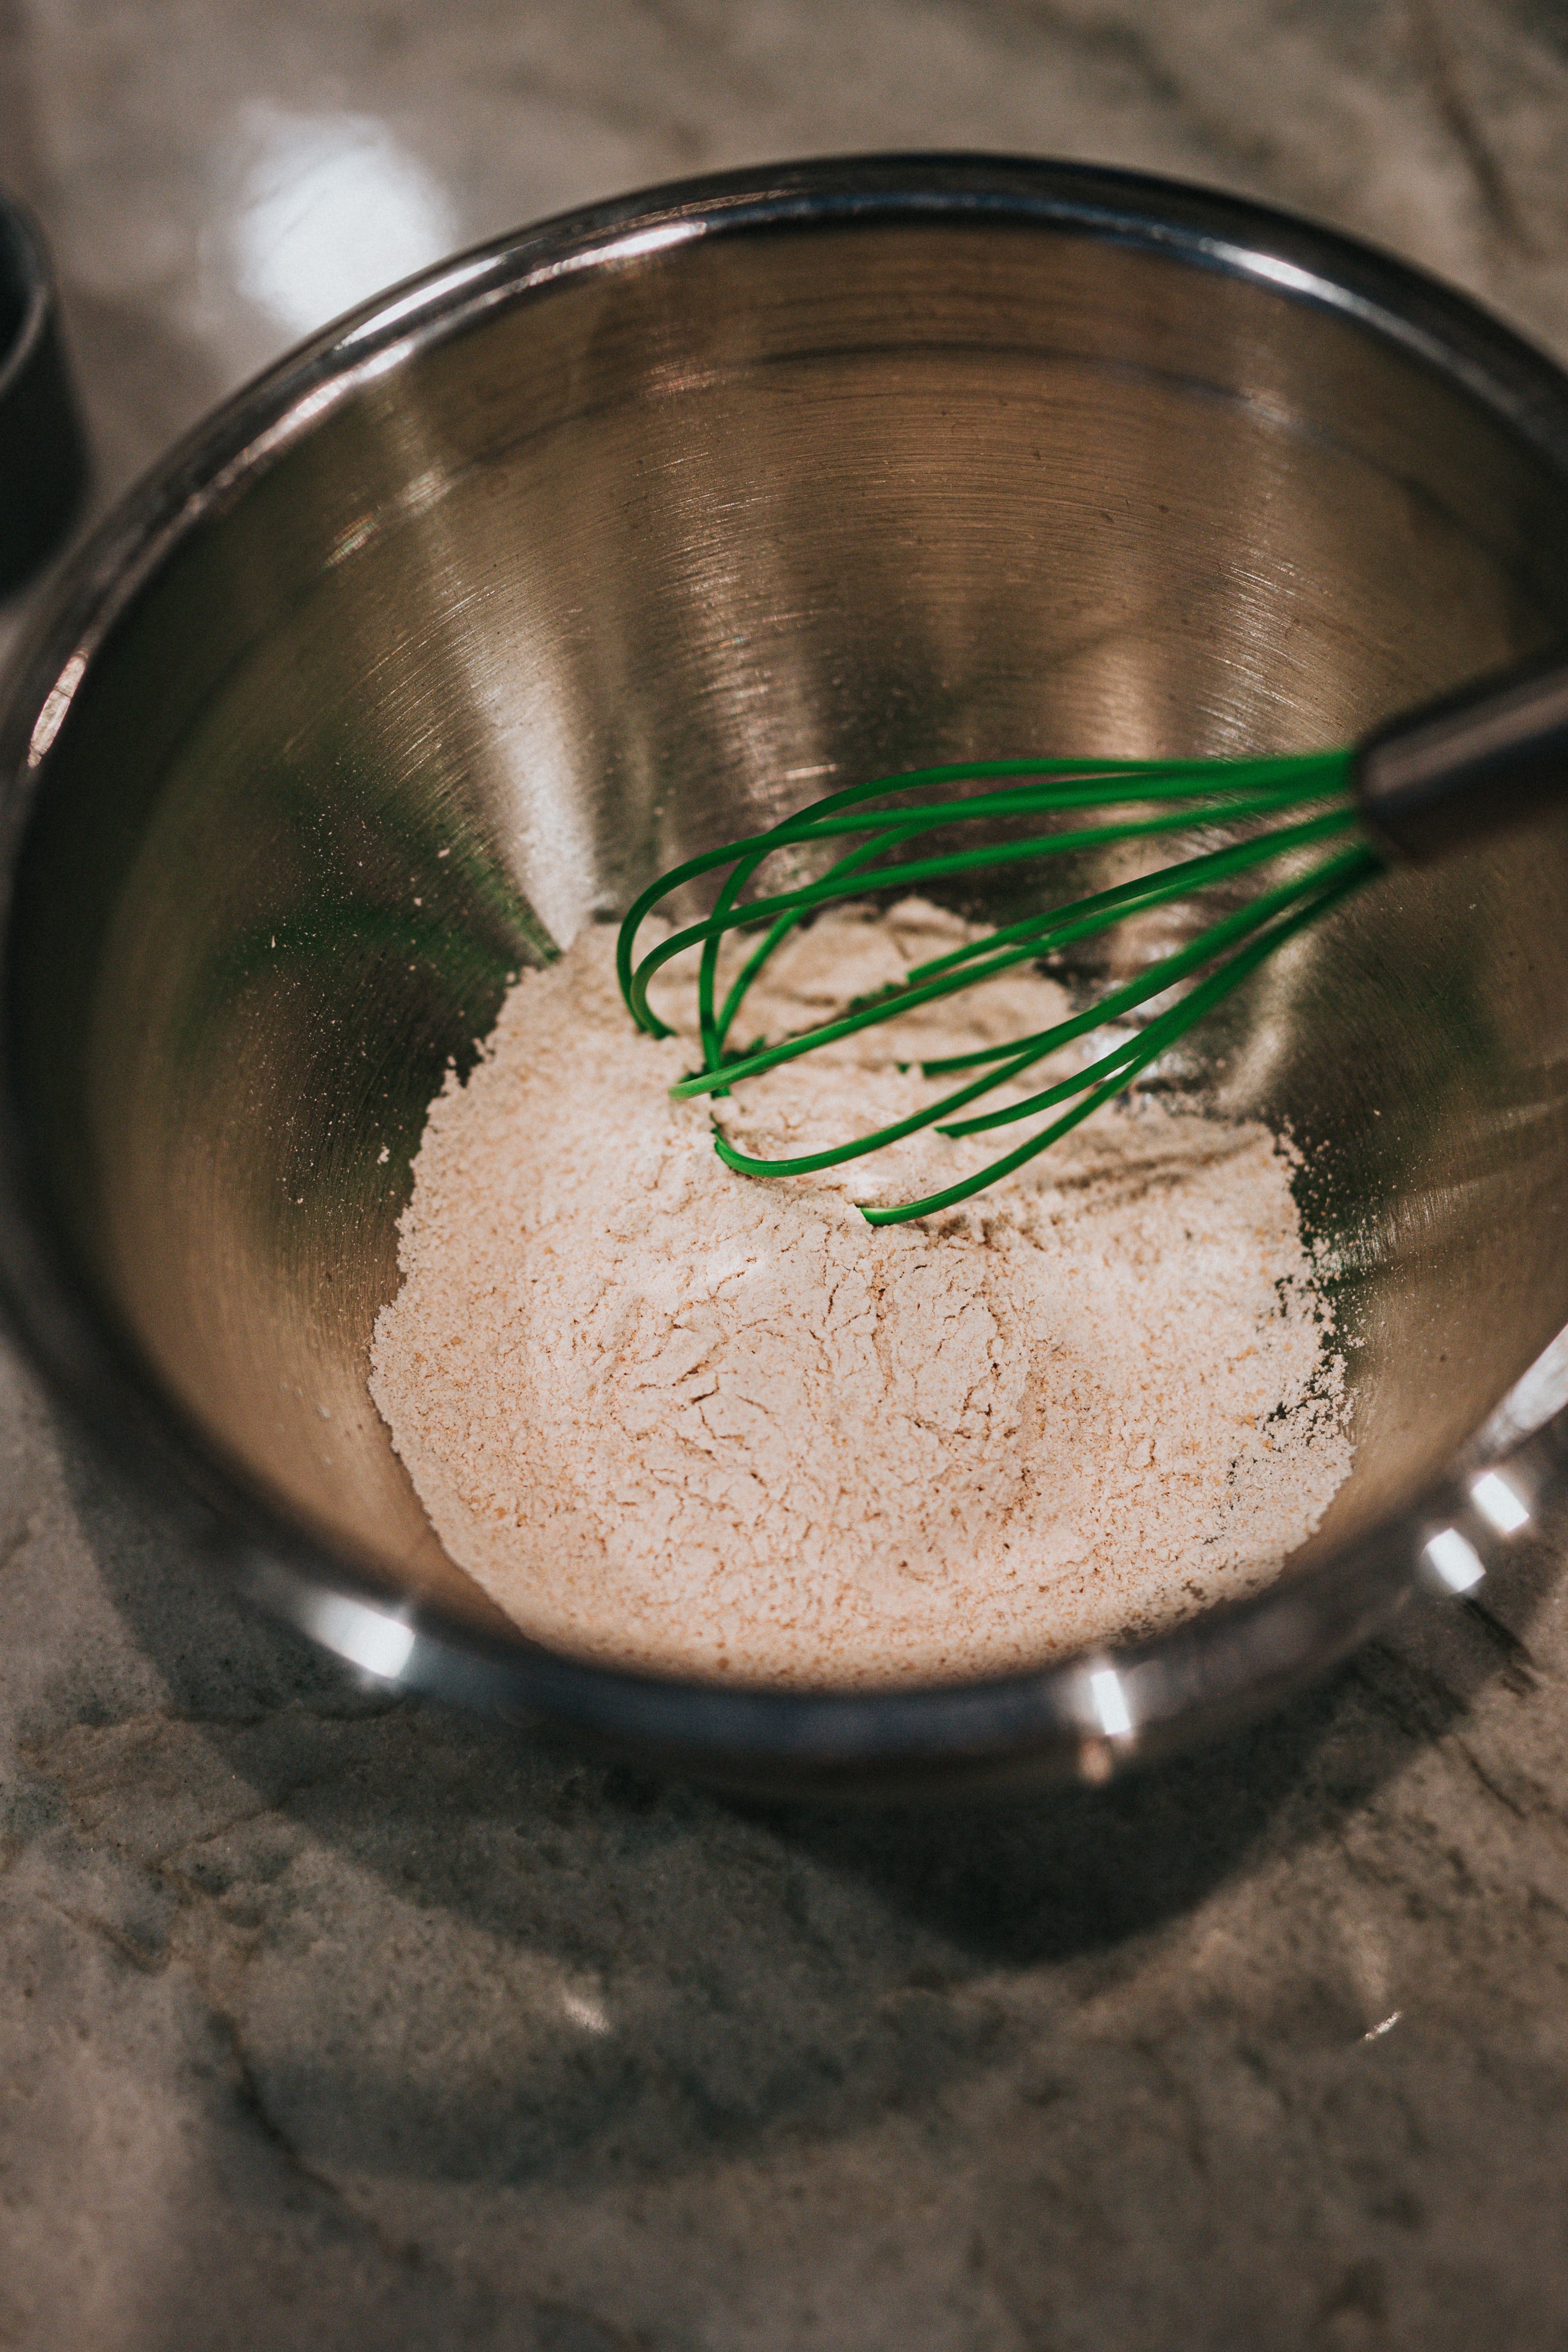 A green whisk mixing flour in a bowl.